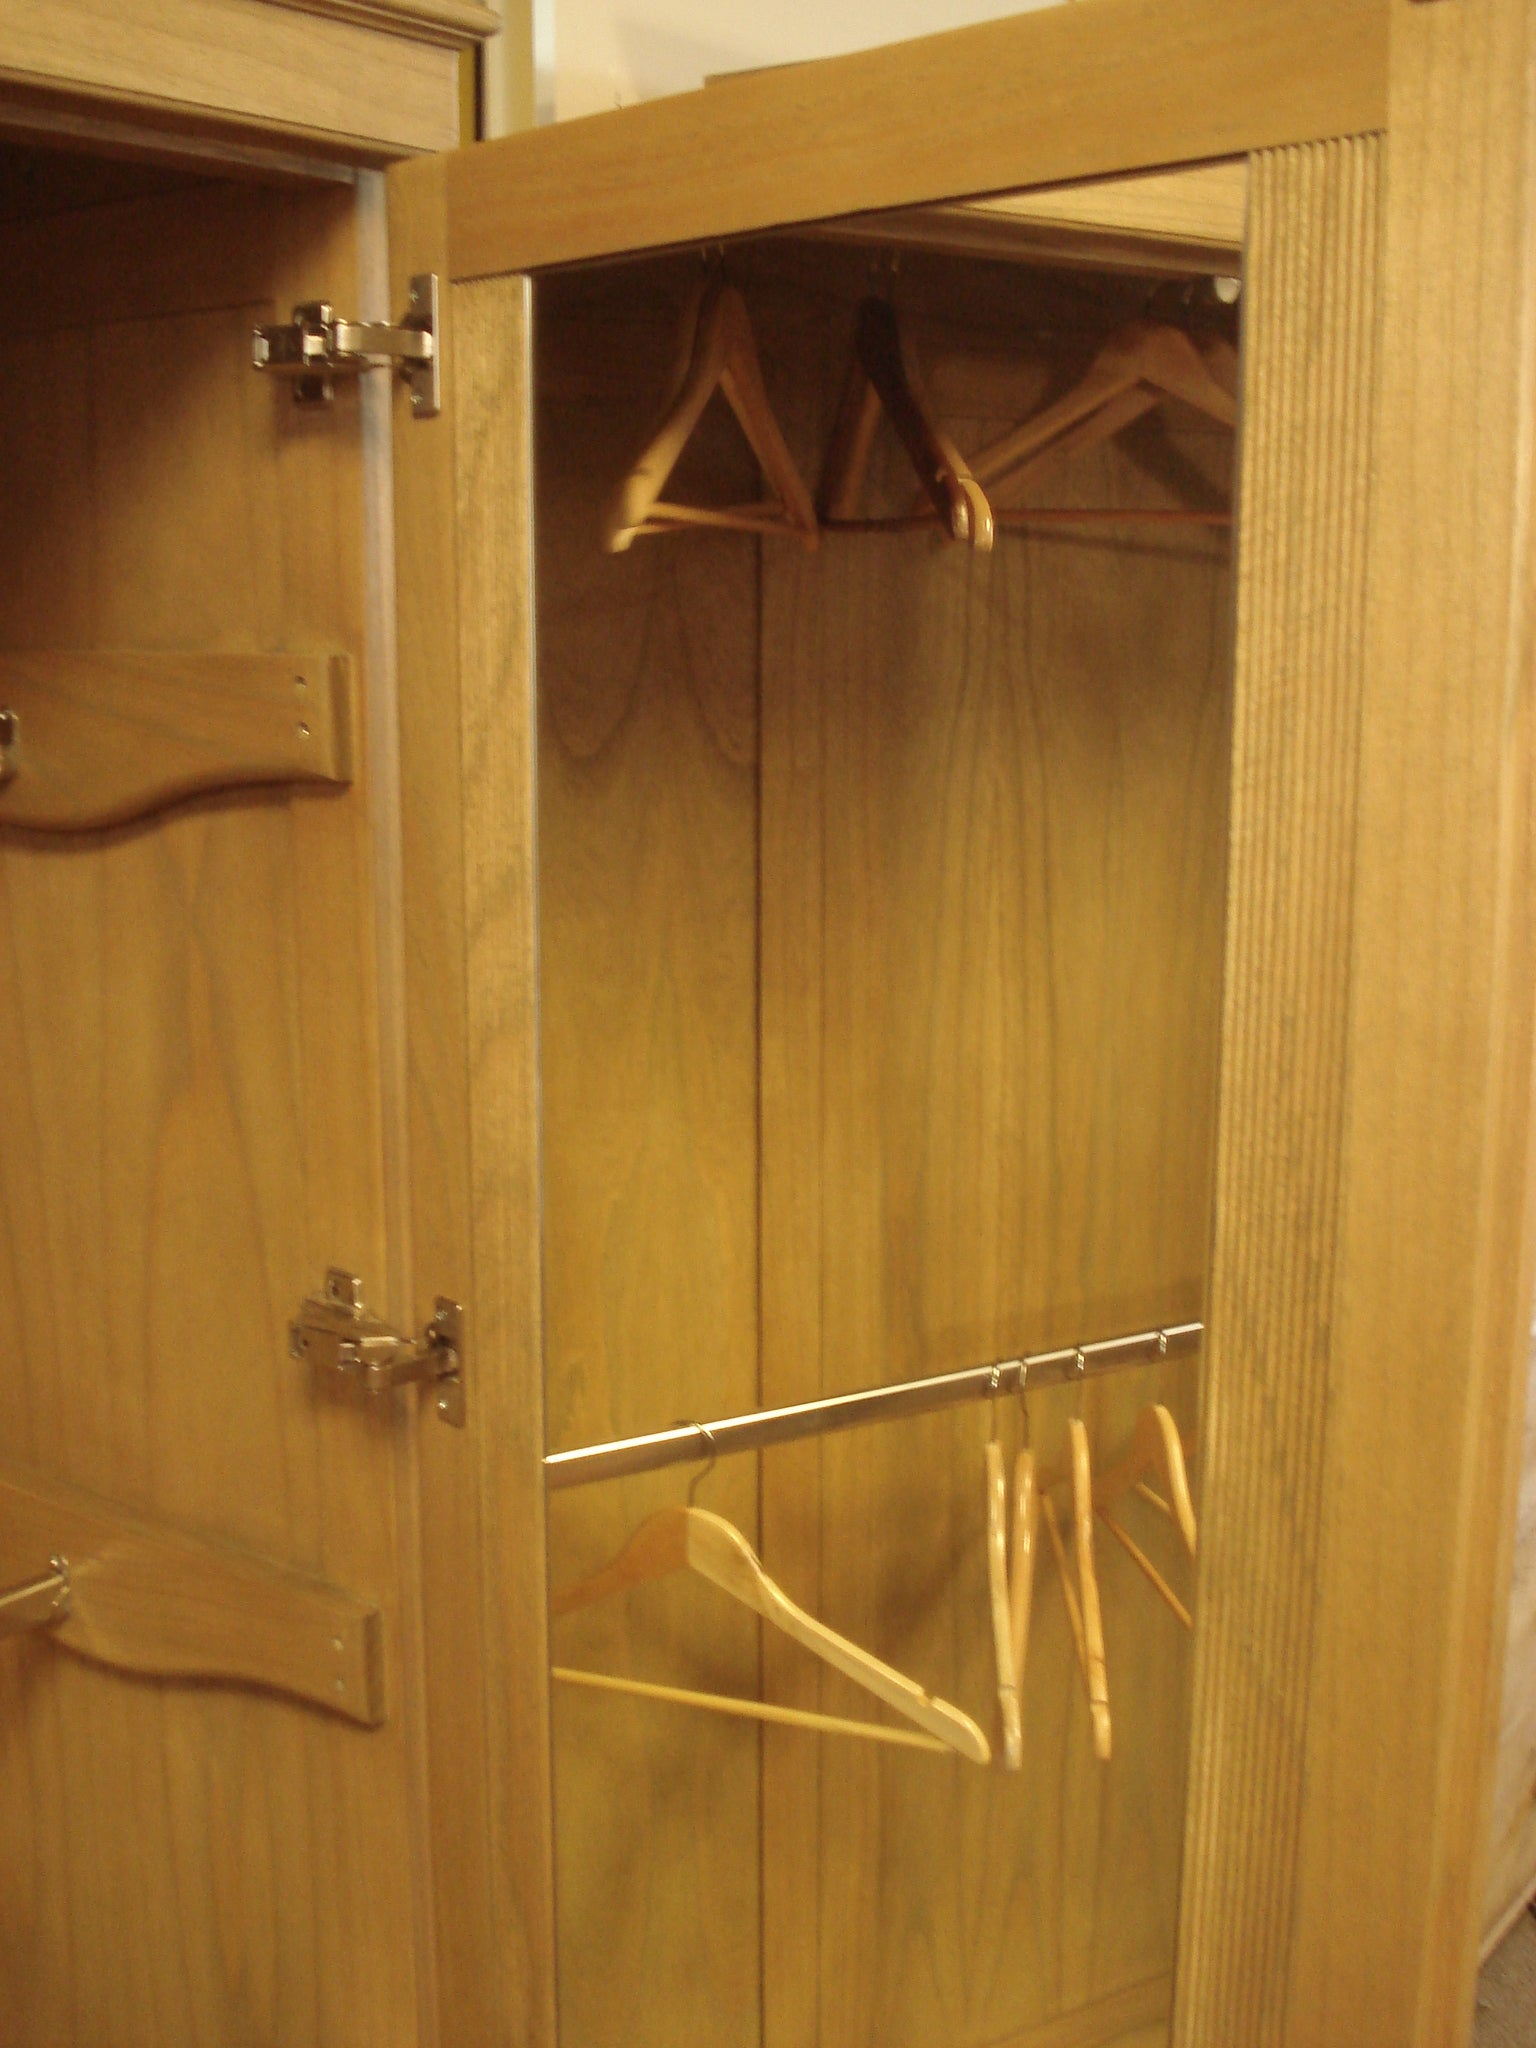 Late century 'Winsor' double wardrobe. Dismantles for transport.